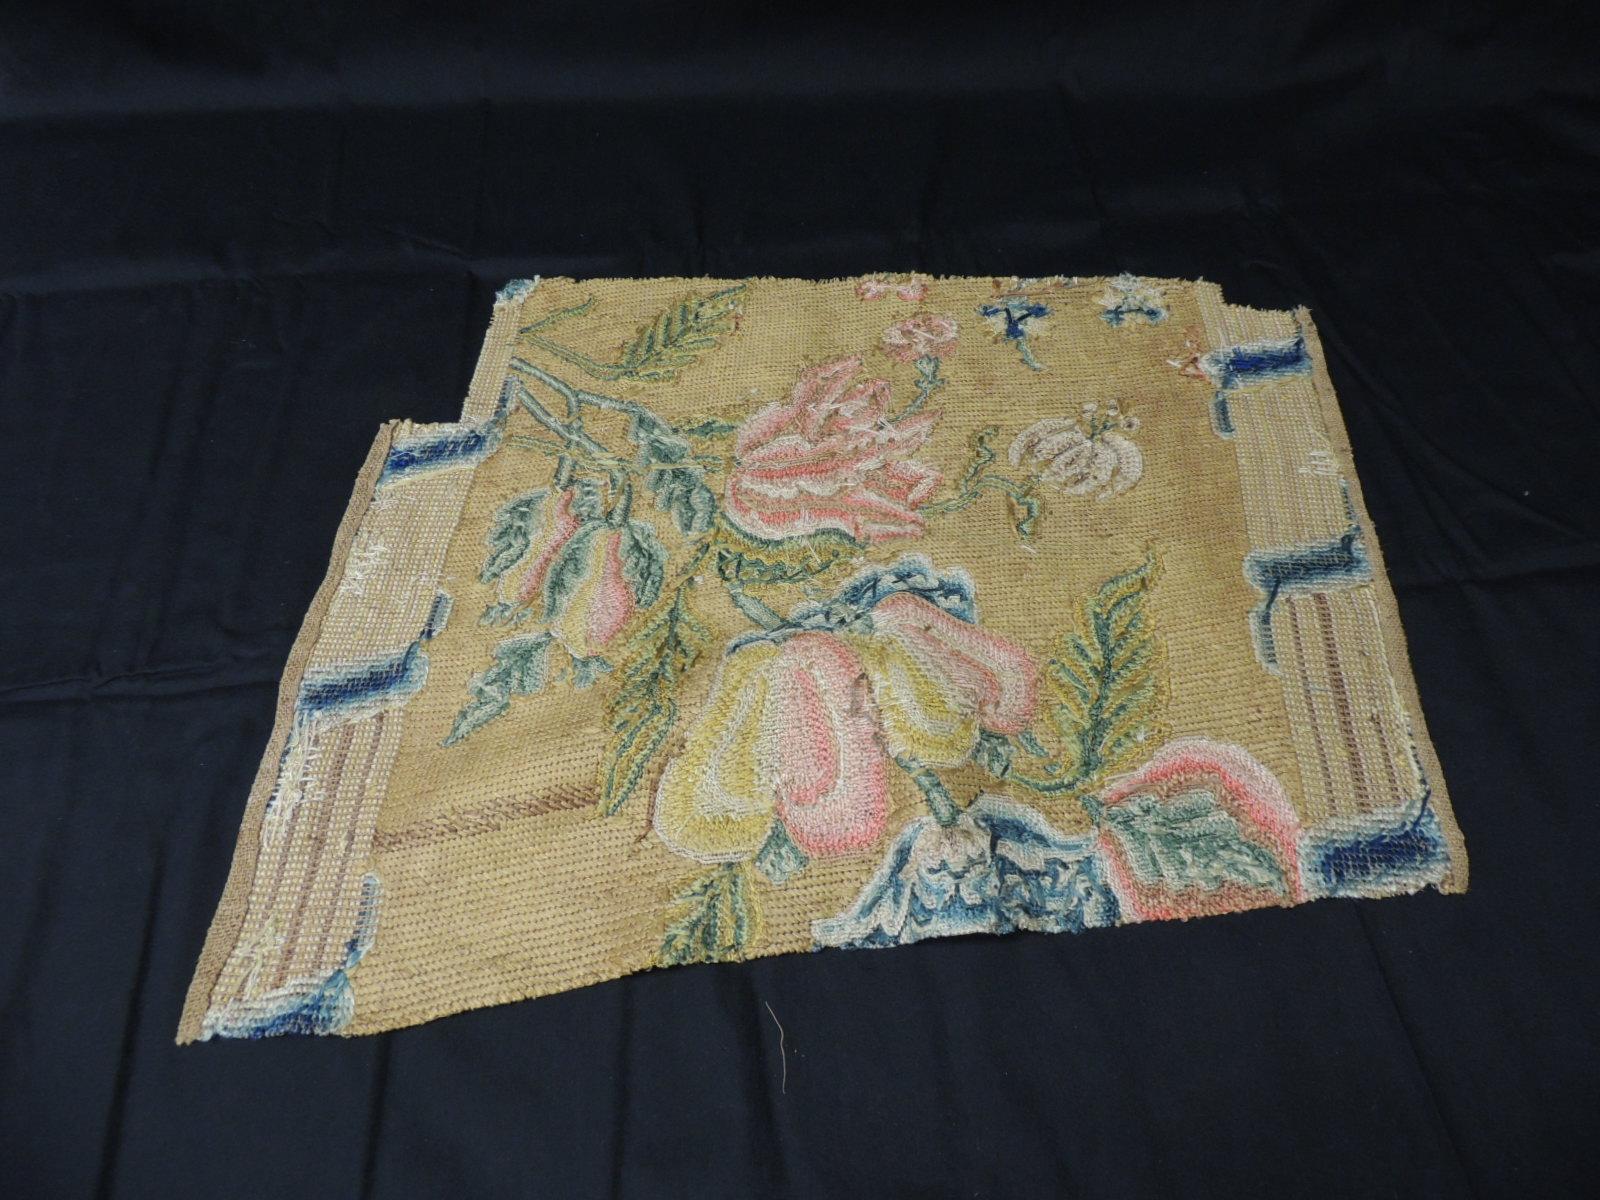 Italian Antique Floral Needlework Tapestry Fragment For Sale